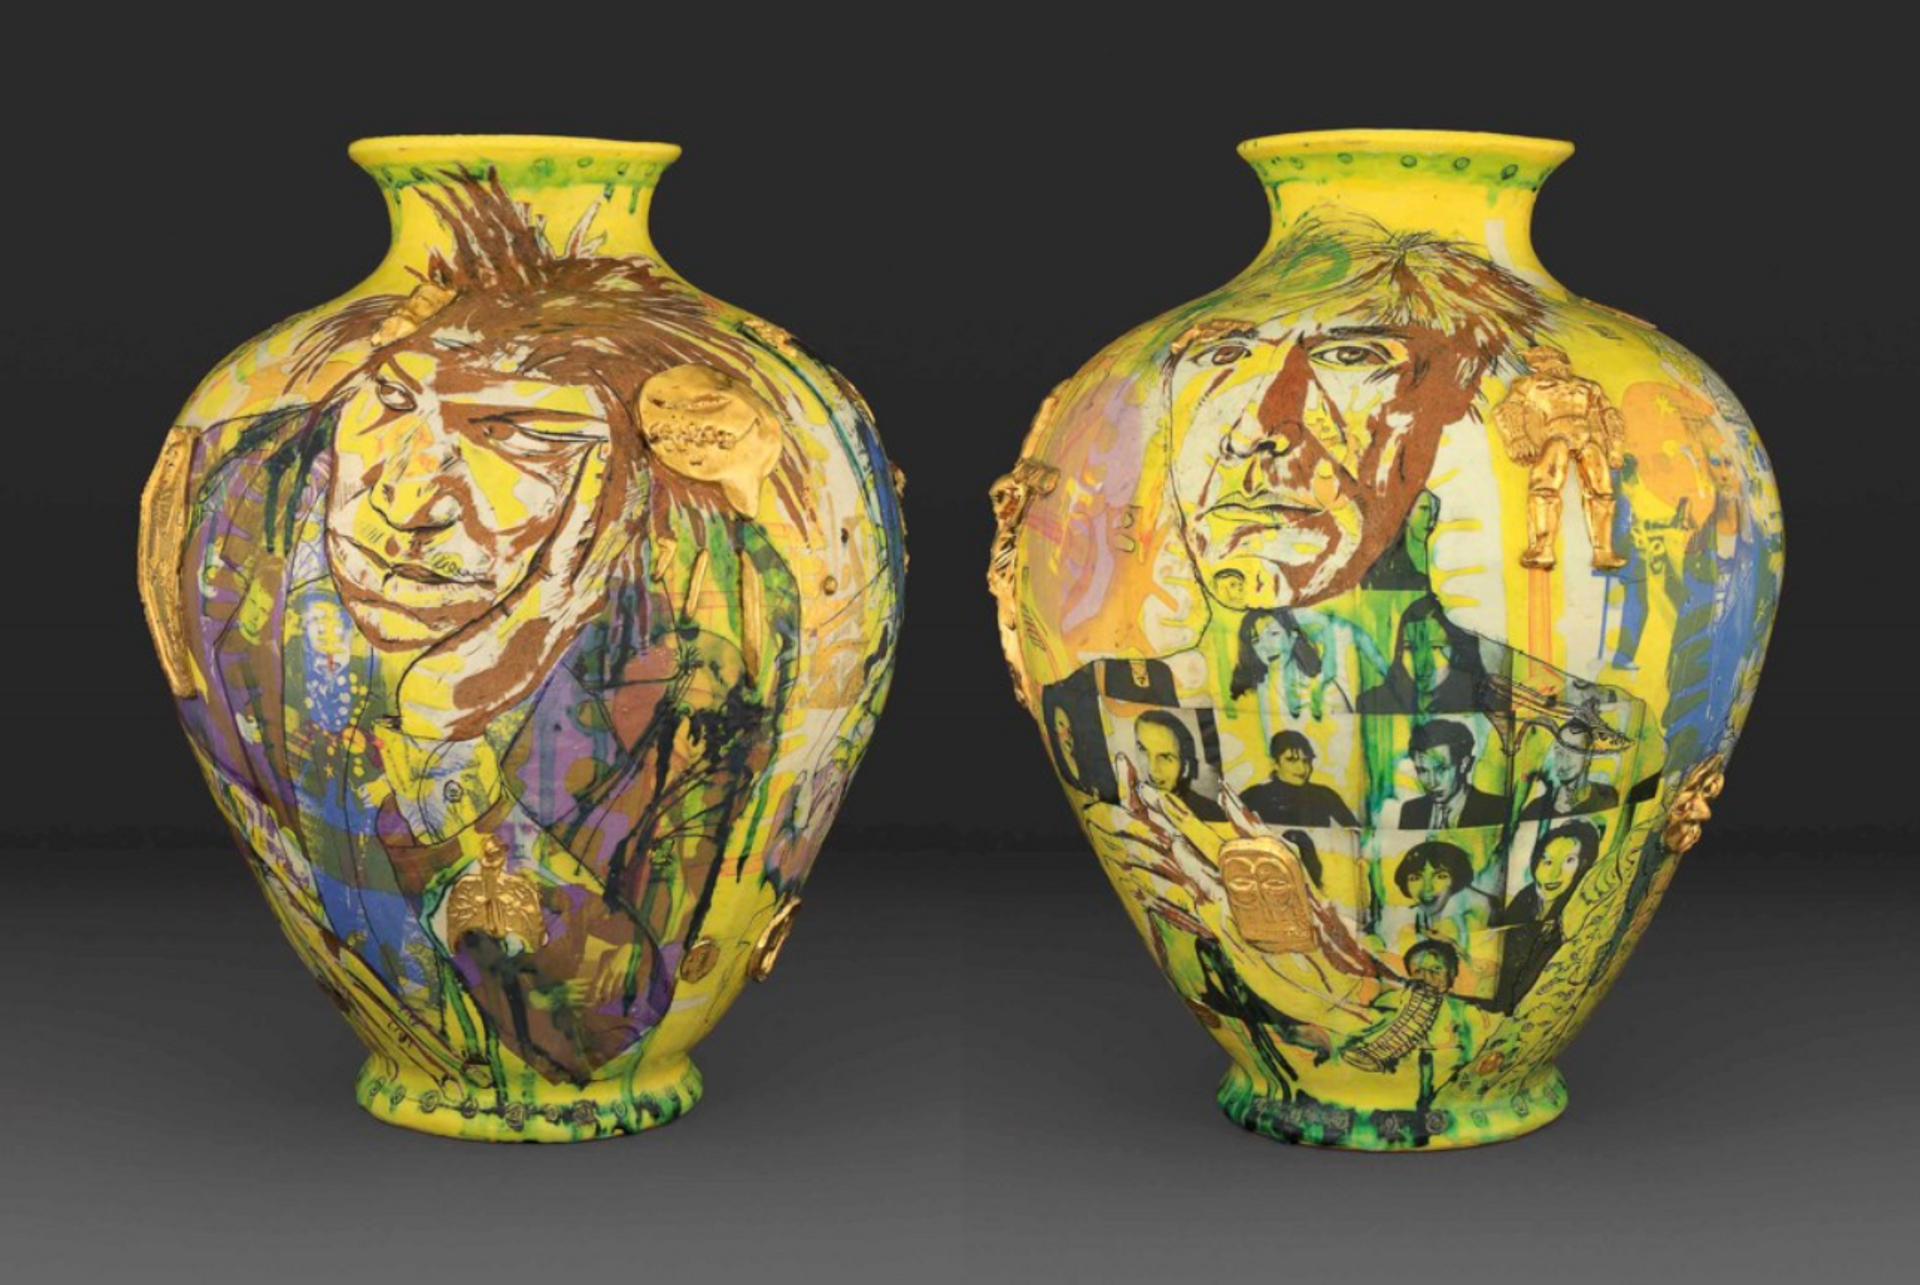 Yellow vase by Grayson Perry, depicting Andy Warhol and Jean-Michel Basquiat and portrait photo transfers.